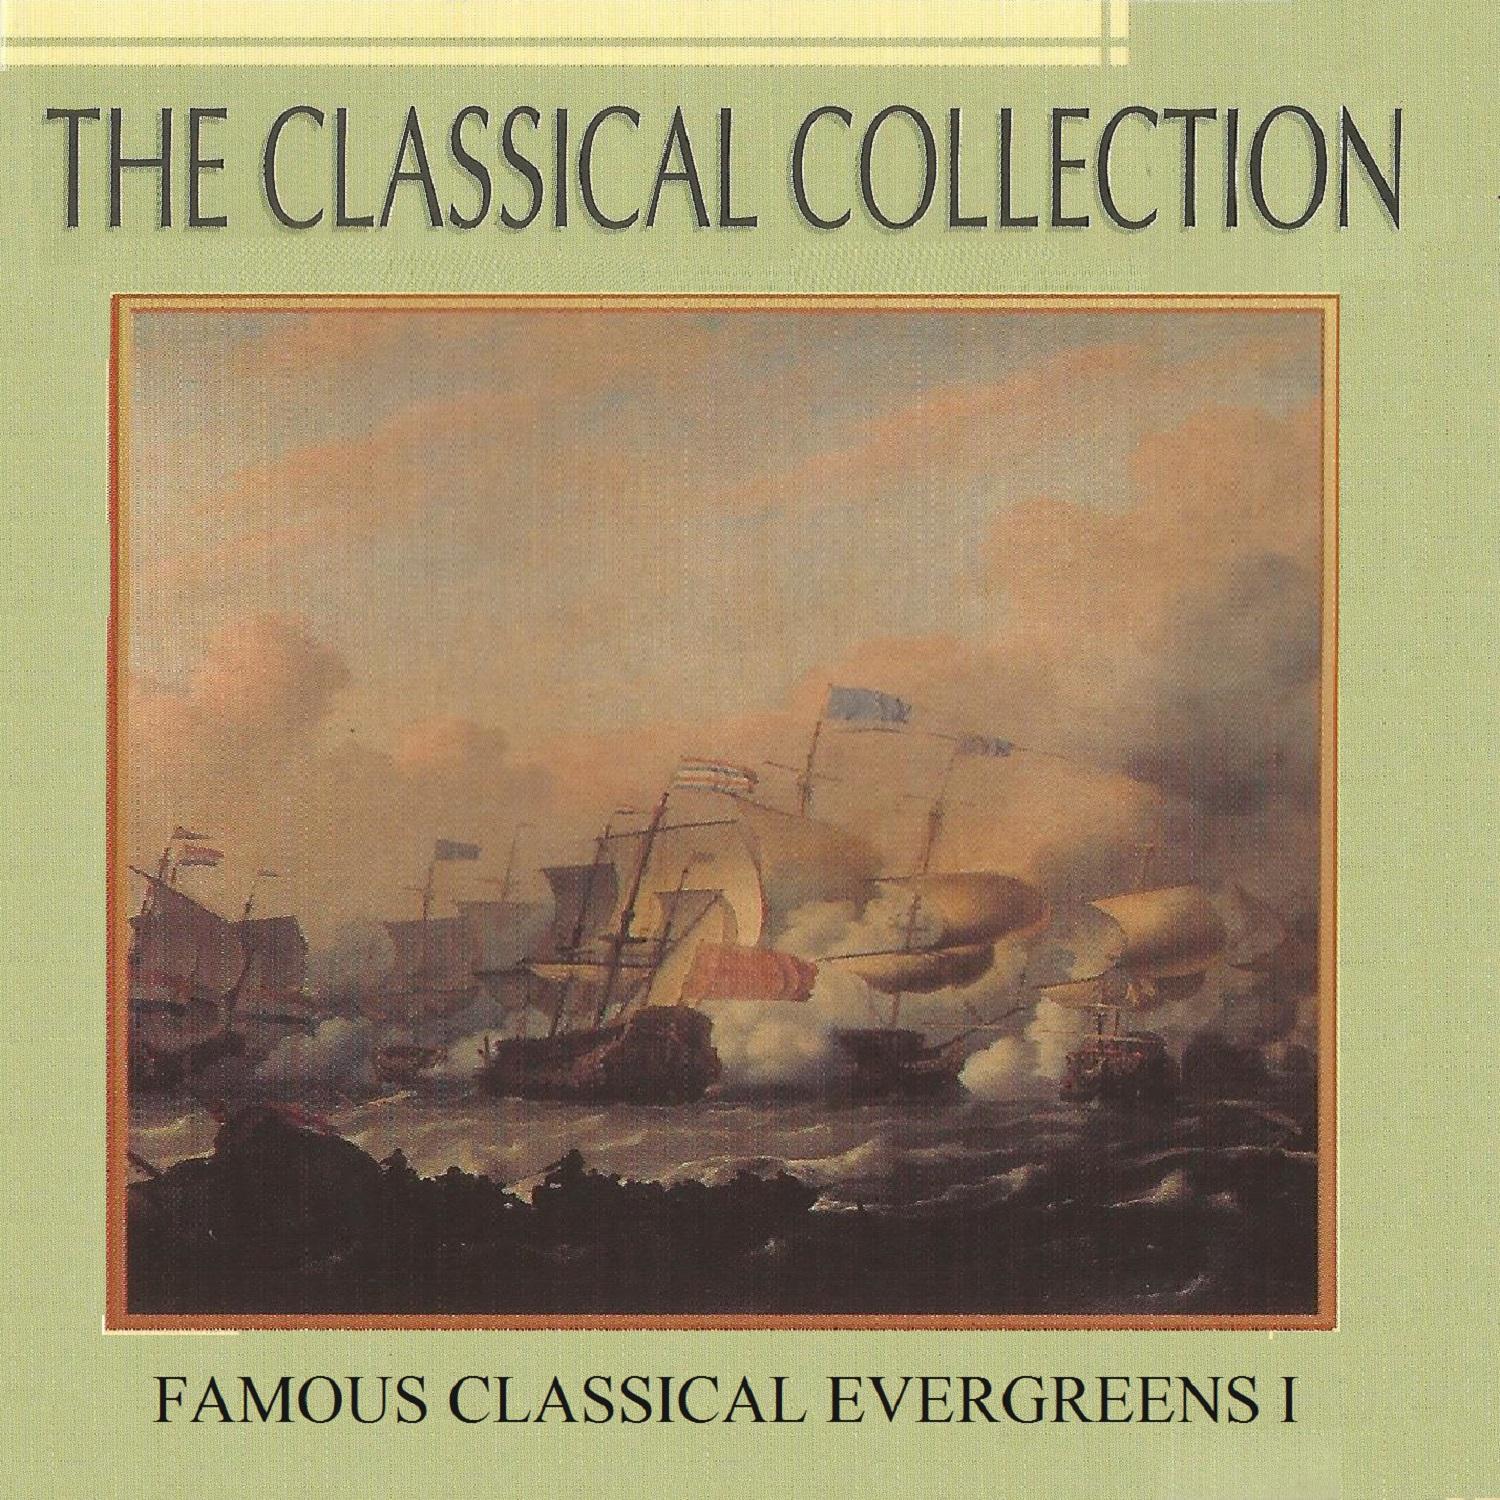 The Classical Collection, Famous Classical Evergreens I